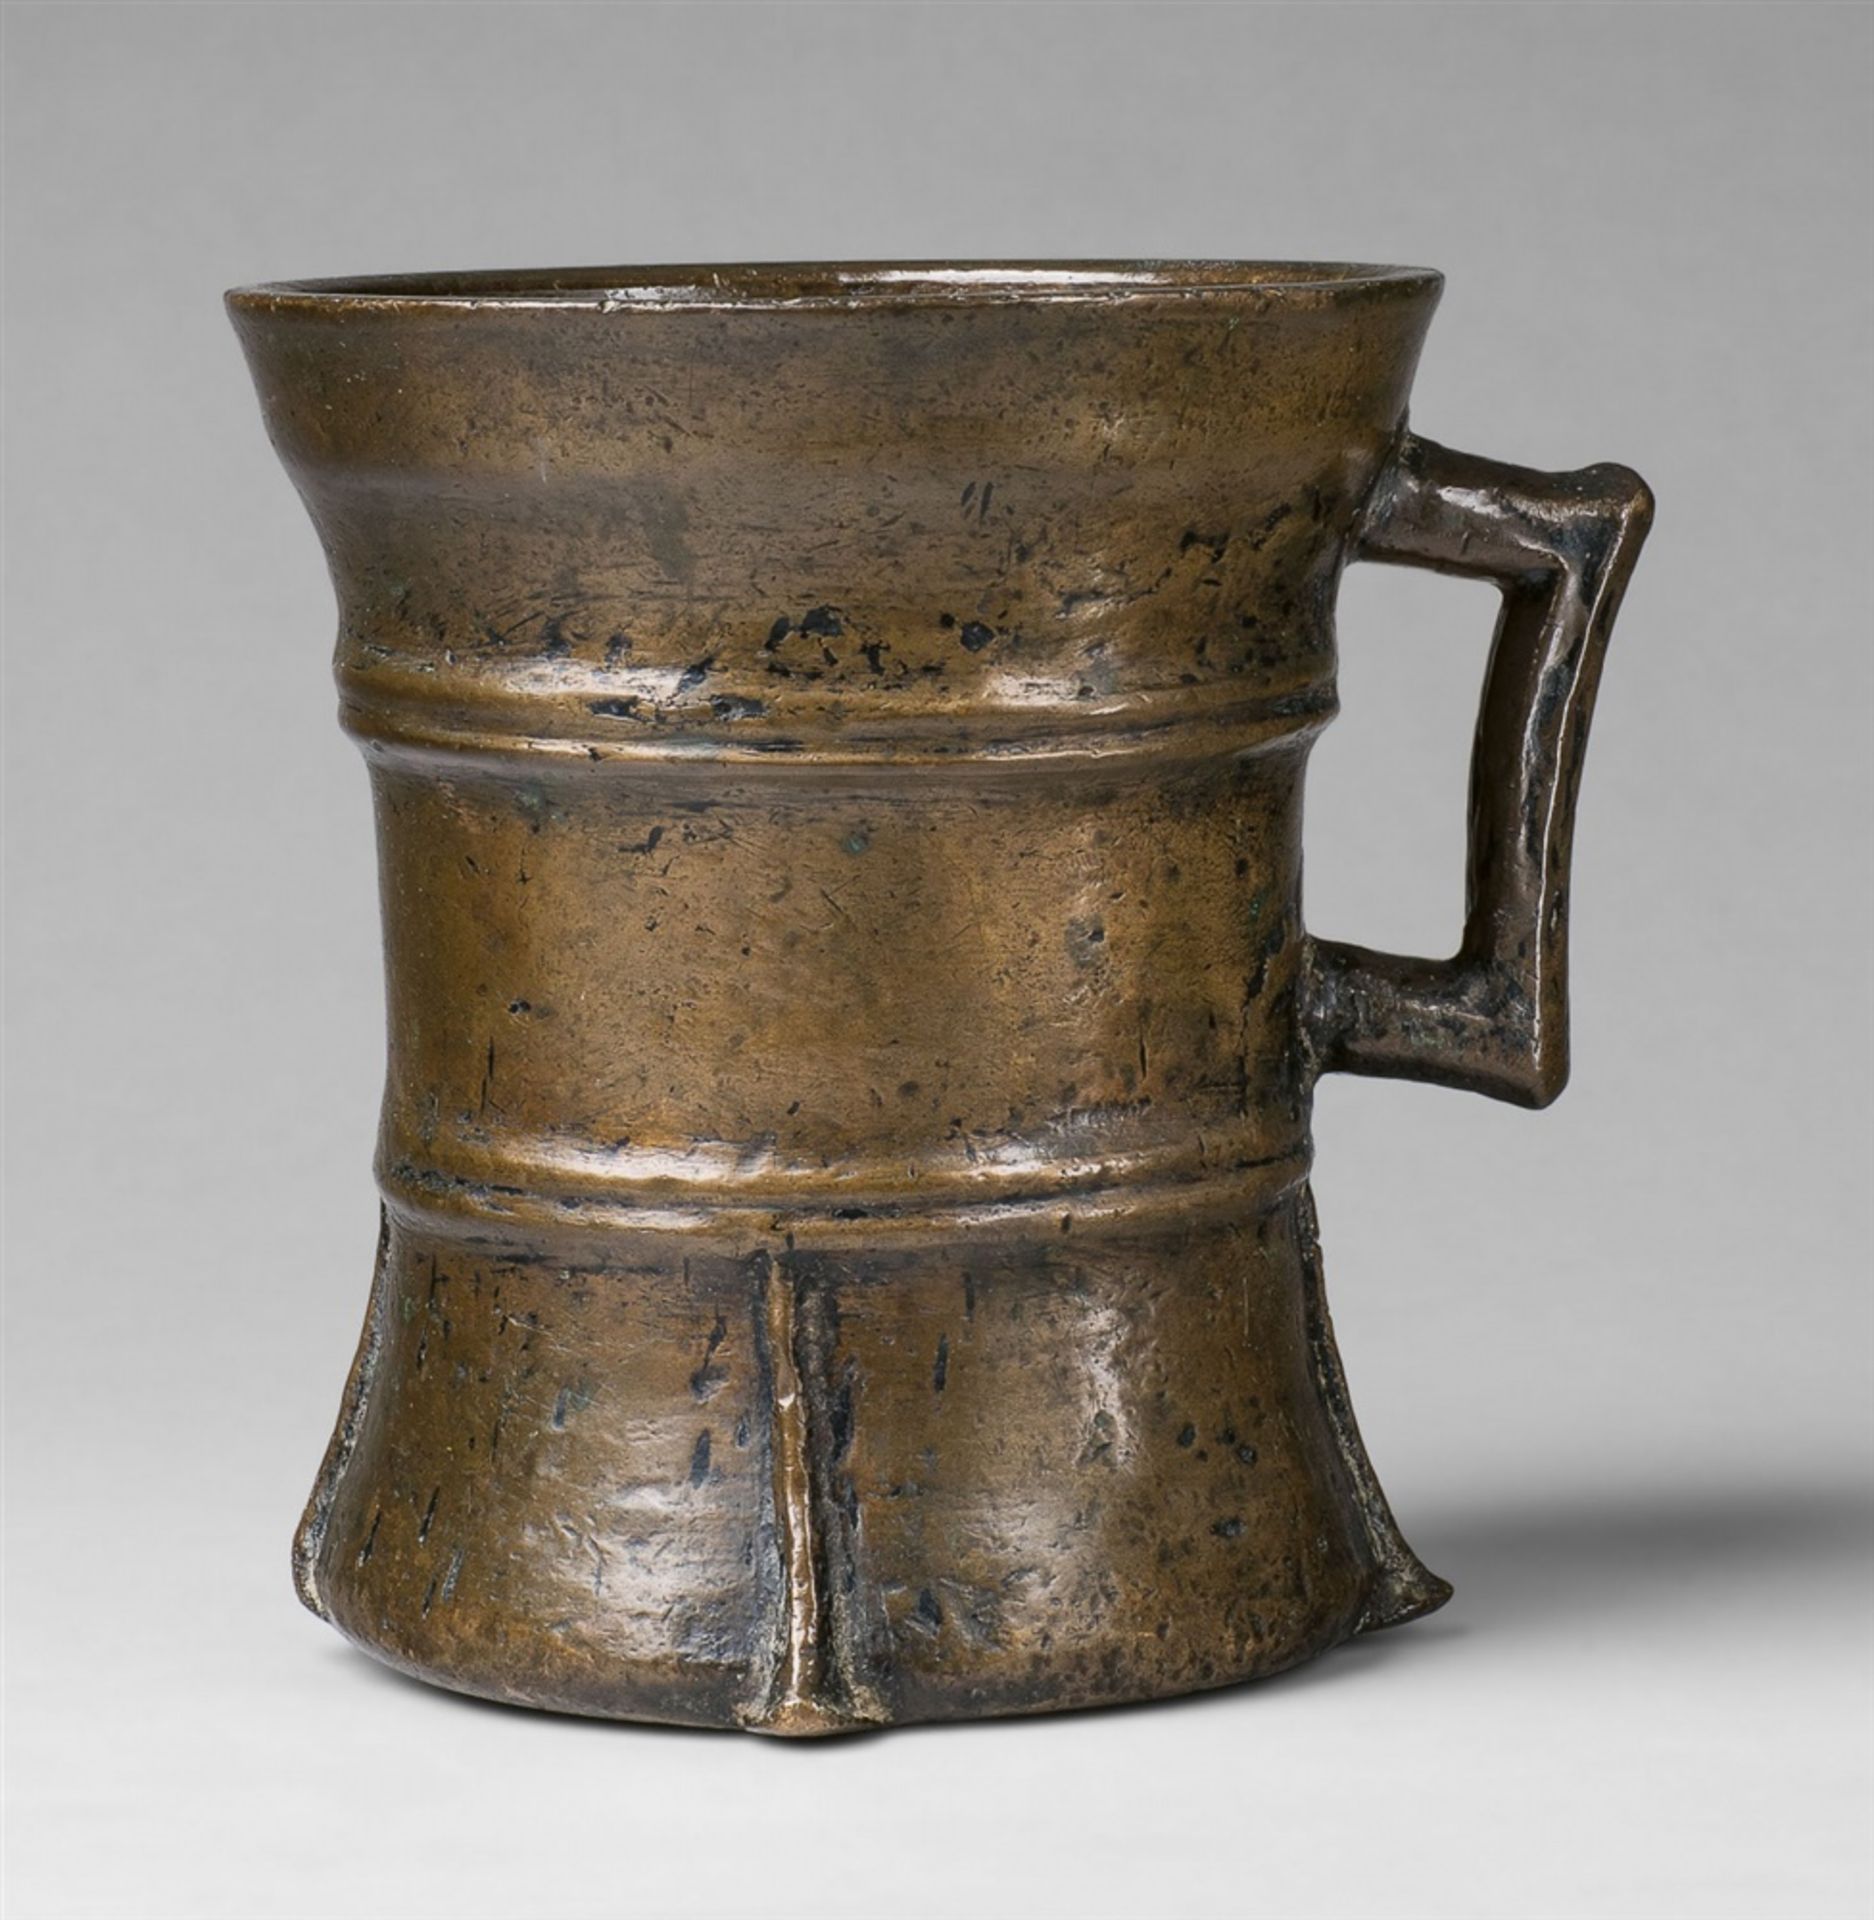 A large Gothic one-handled mortarCast bronze with slightly mottled golden brown patina. With two